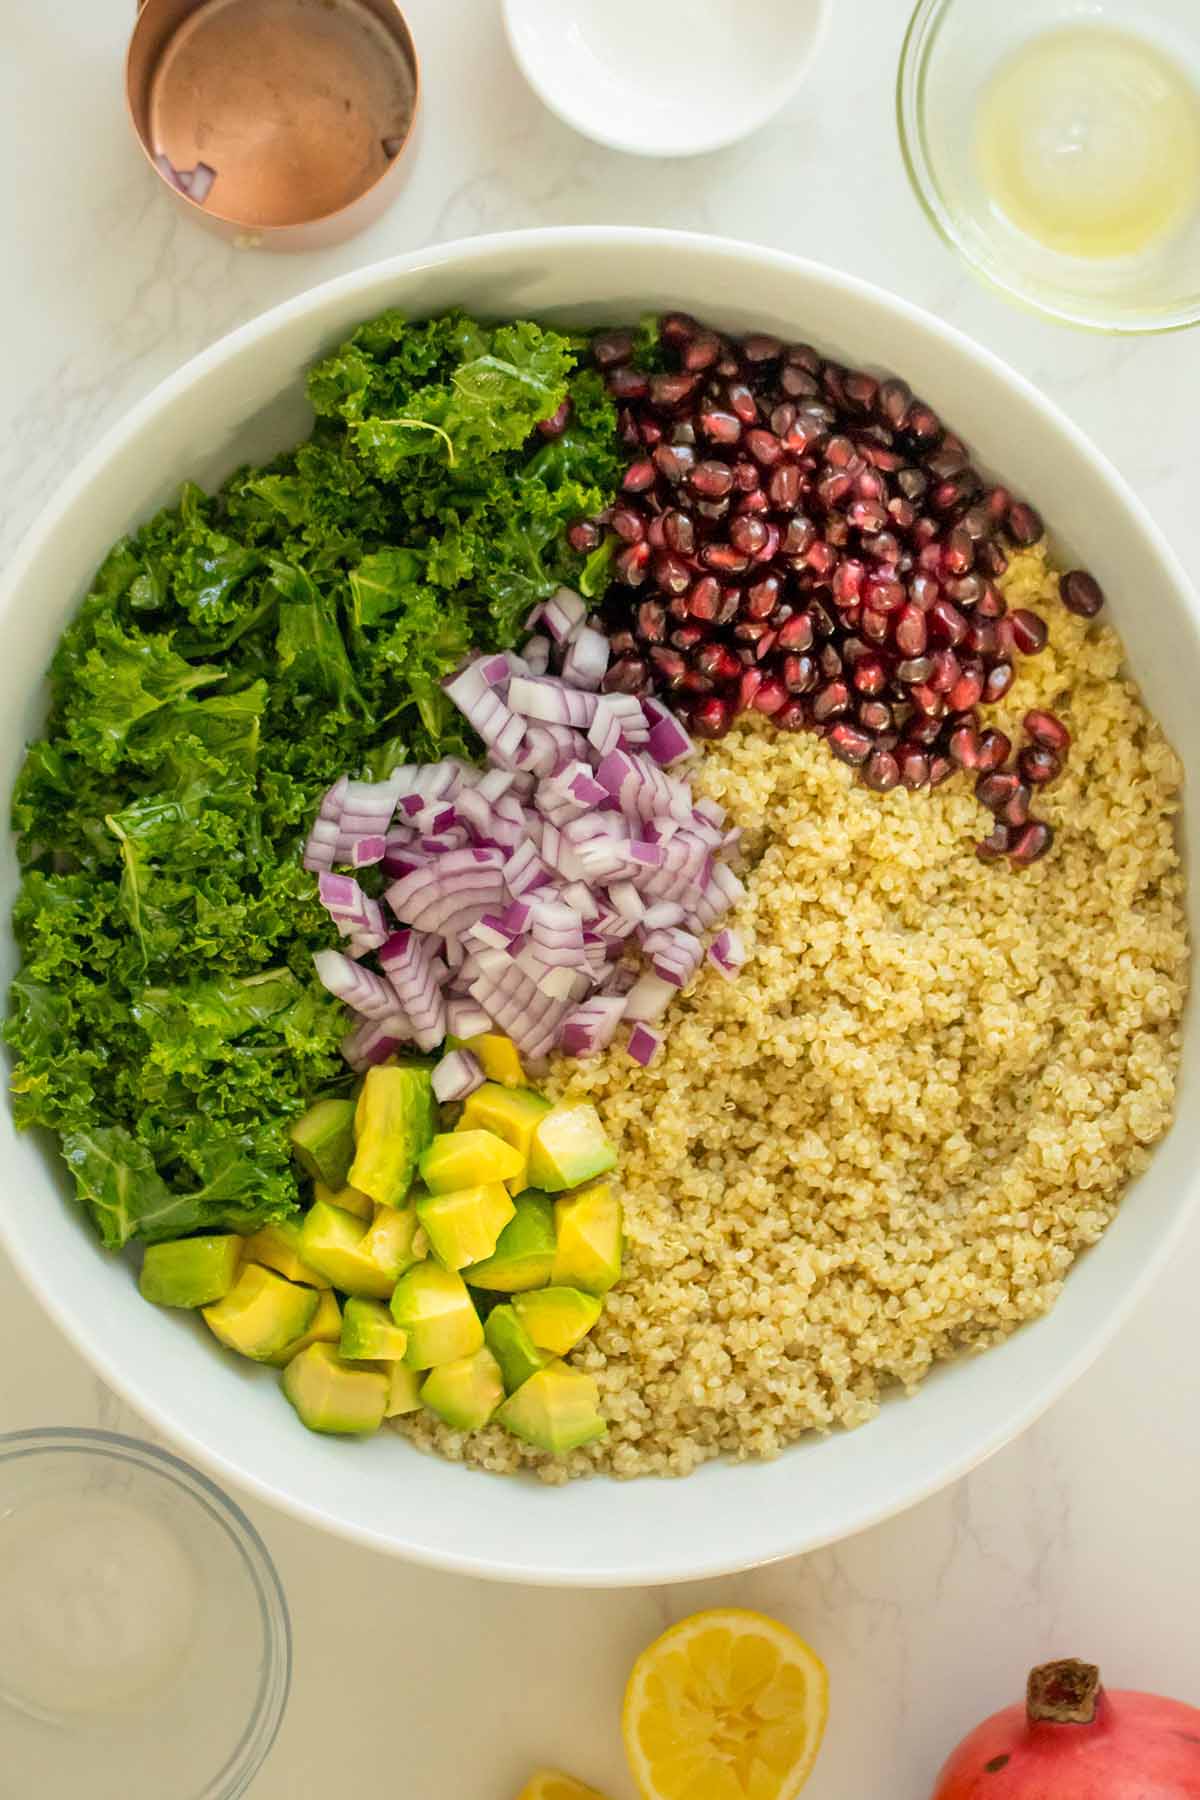 kale, quinoa, pomegranate seeds, red onion, and avocado in a mixing bowl before mixing